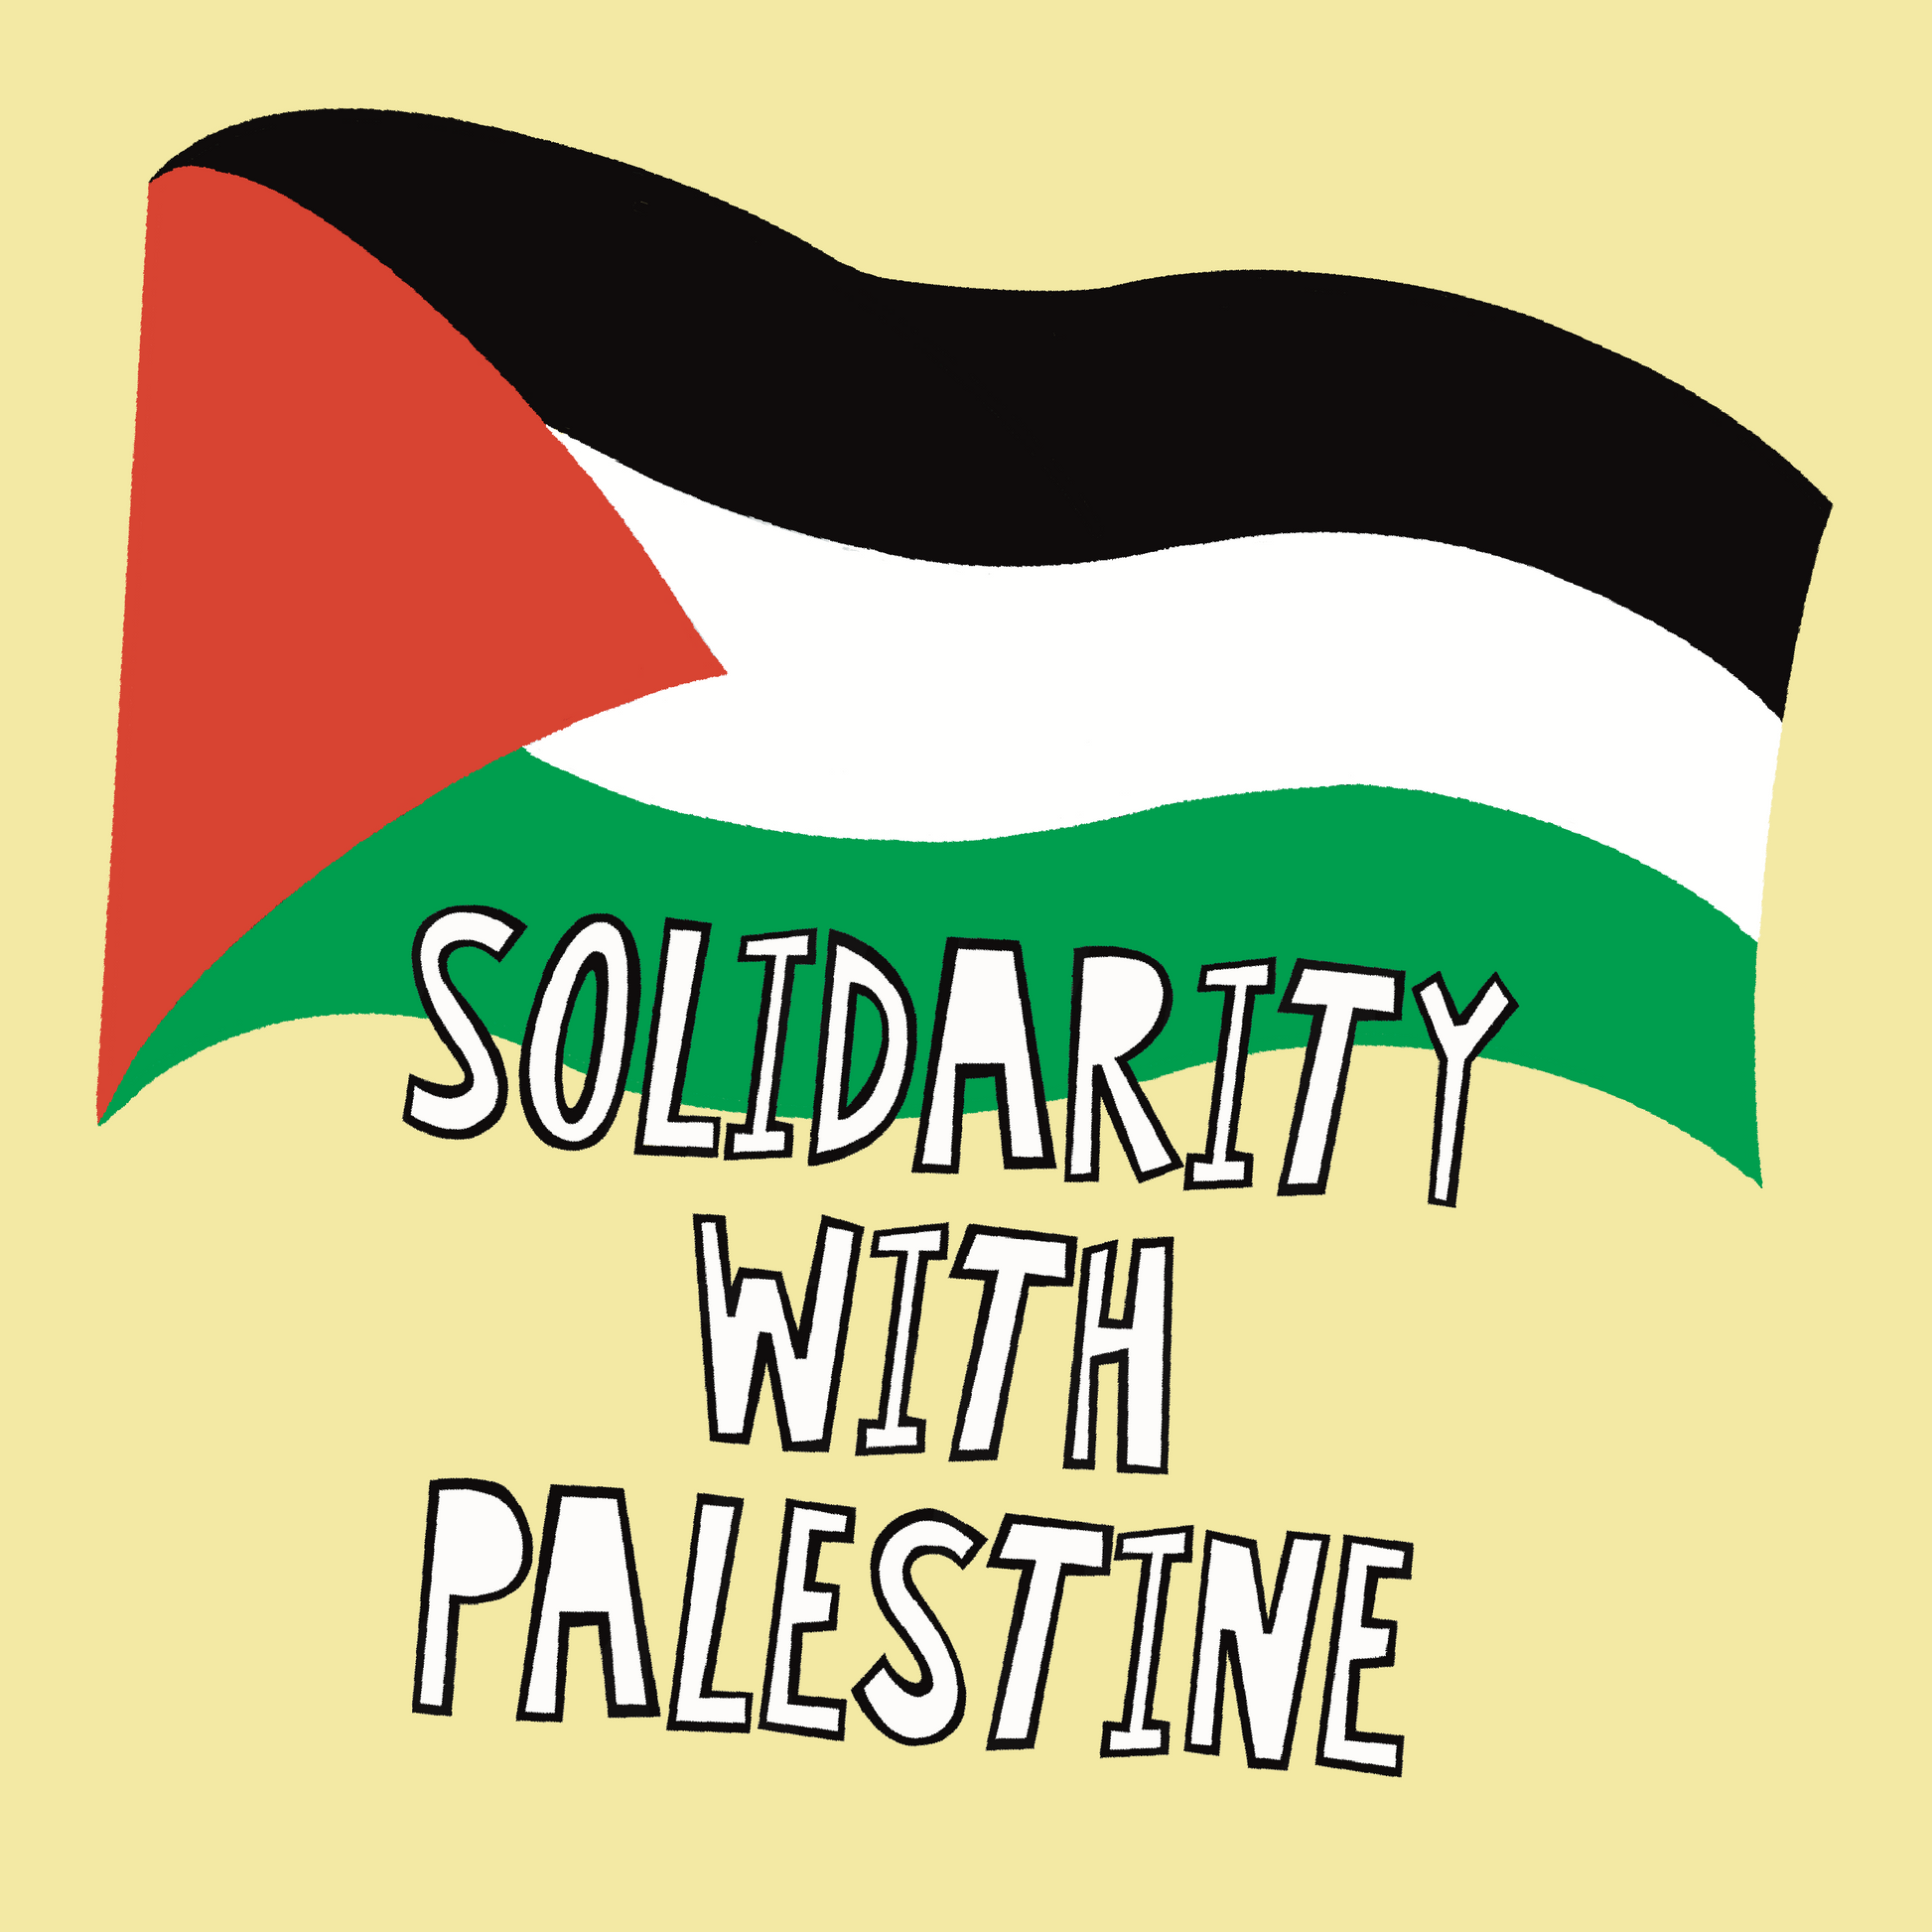 Collection of stickers about Palestine. Solidarity for Palestine